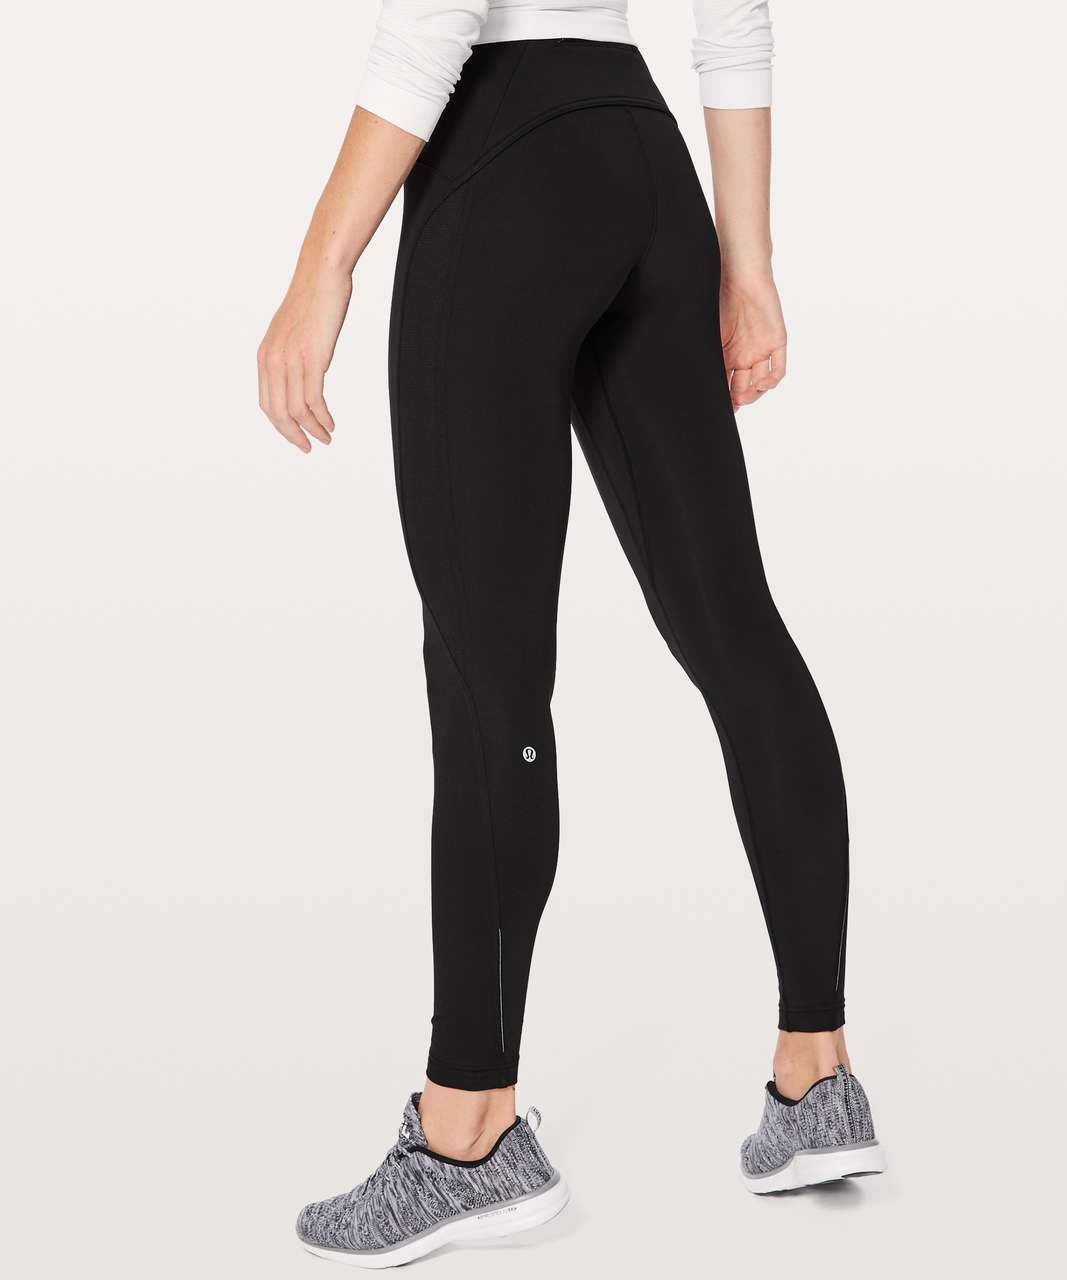 lululemon athletica Fast And Free High-rise Fleece Tights 28 in